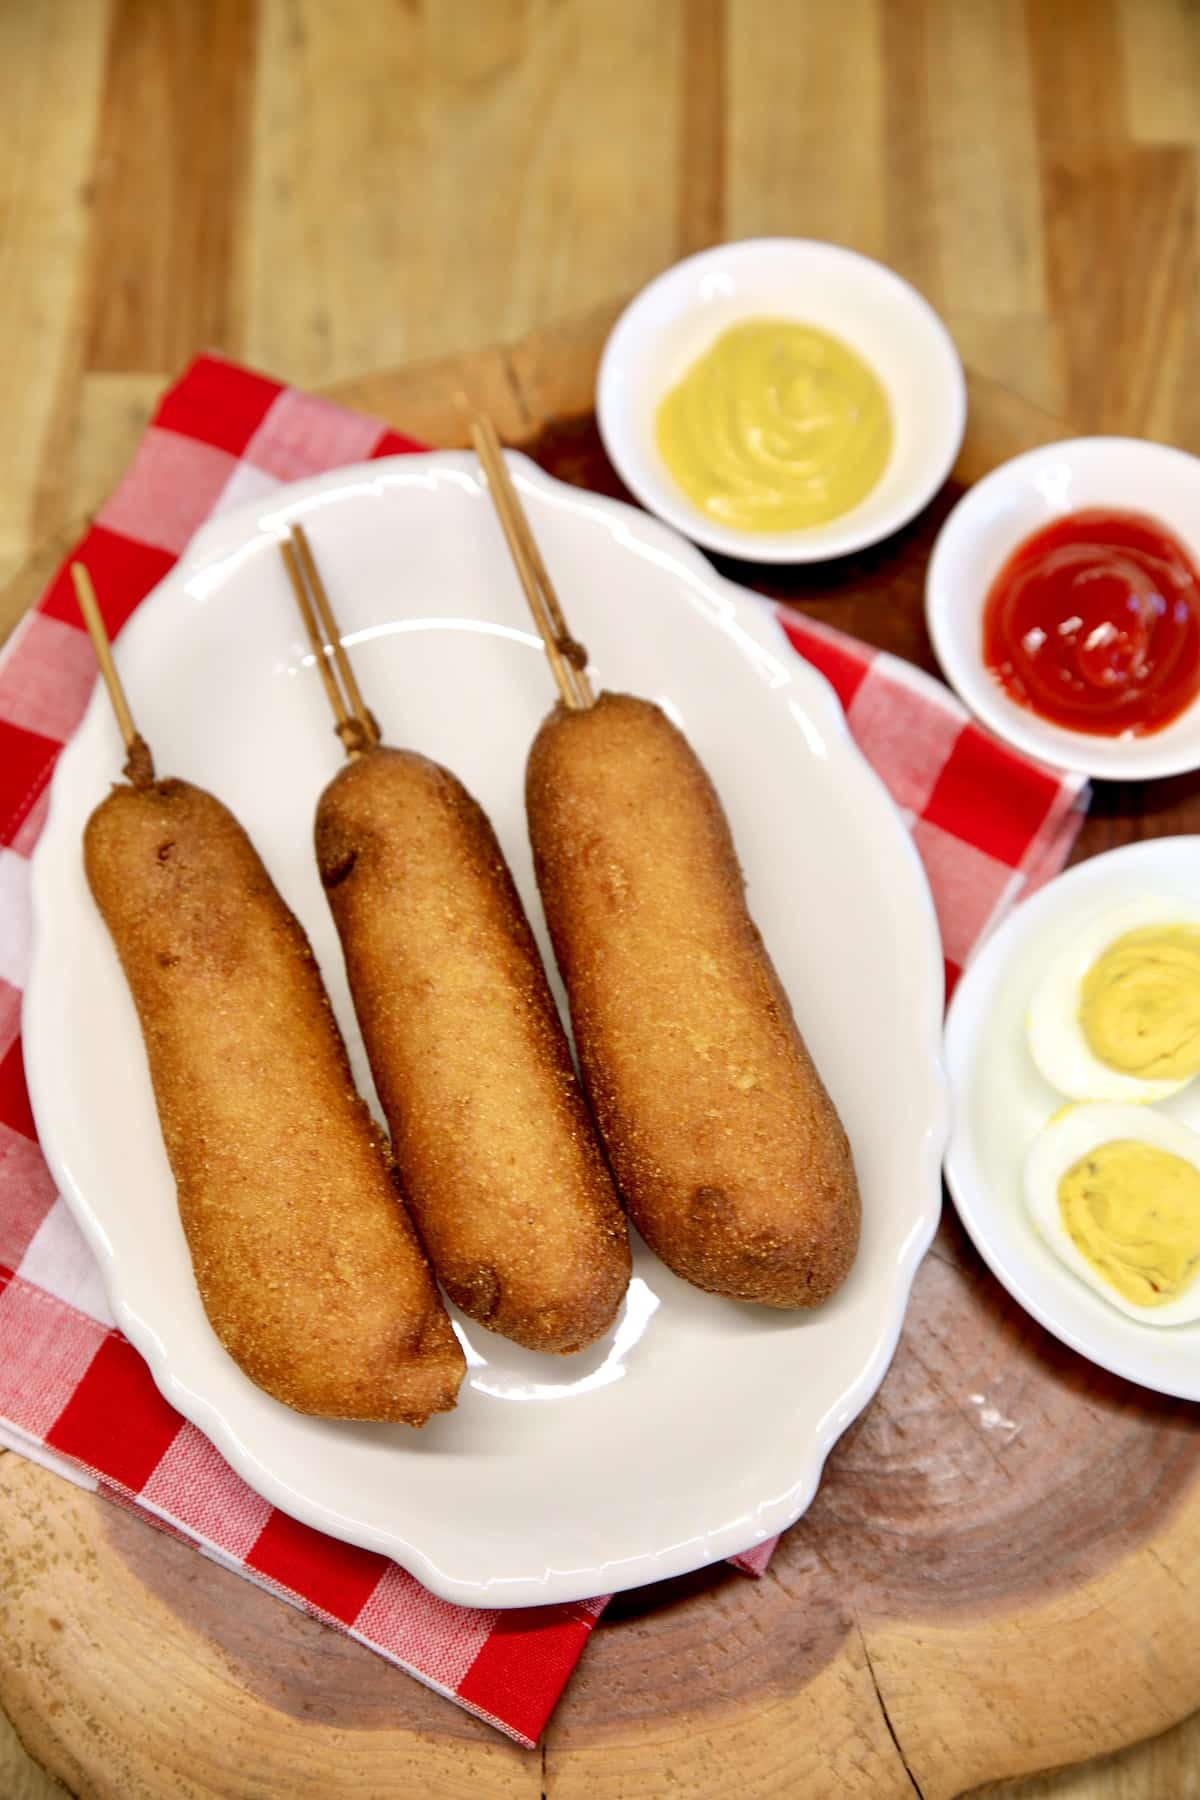 Corn dogs on a platter with bowls of mustard and ketchup.